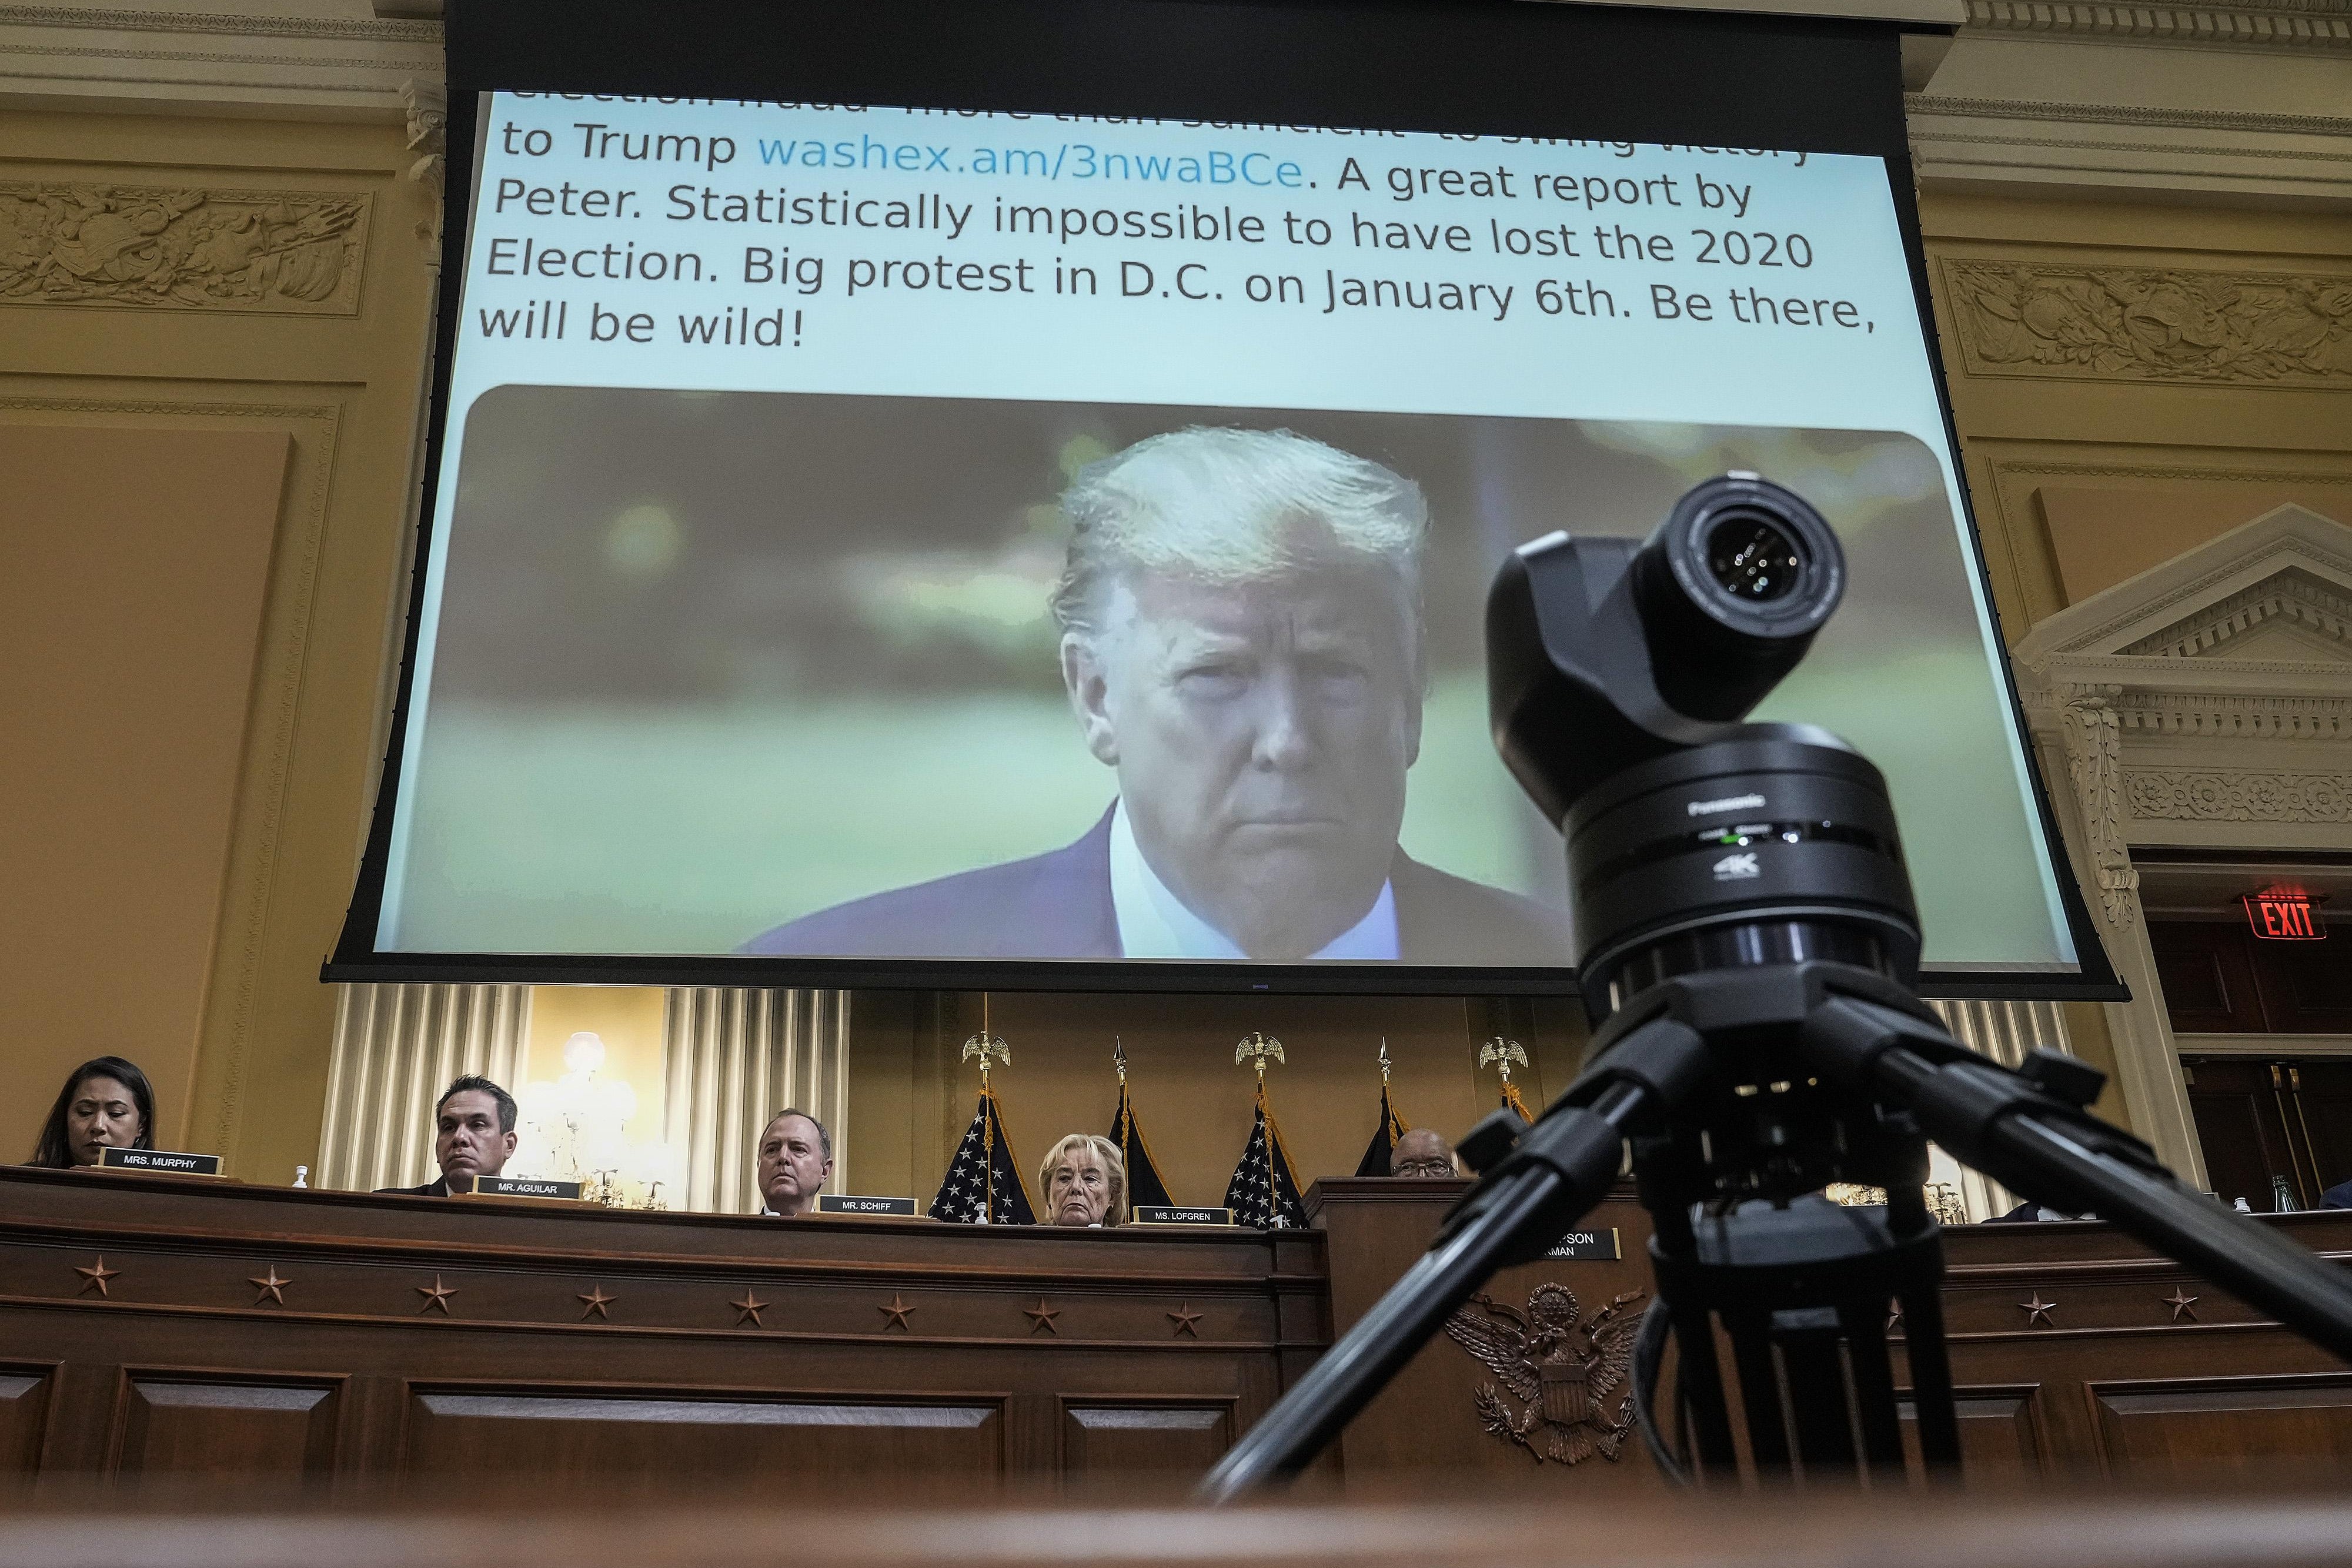 Above people sitting at a large desk is a screen that shows a tweet from Donald Trump. It reads in part: "Big protest in D.C. on January 6th. Be there, will be wild!"